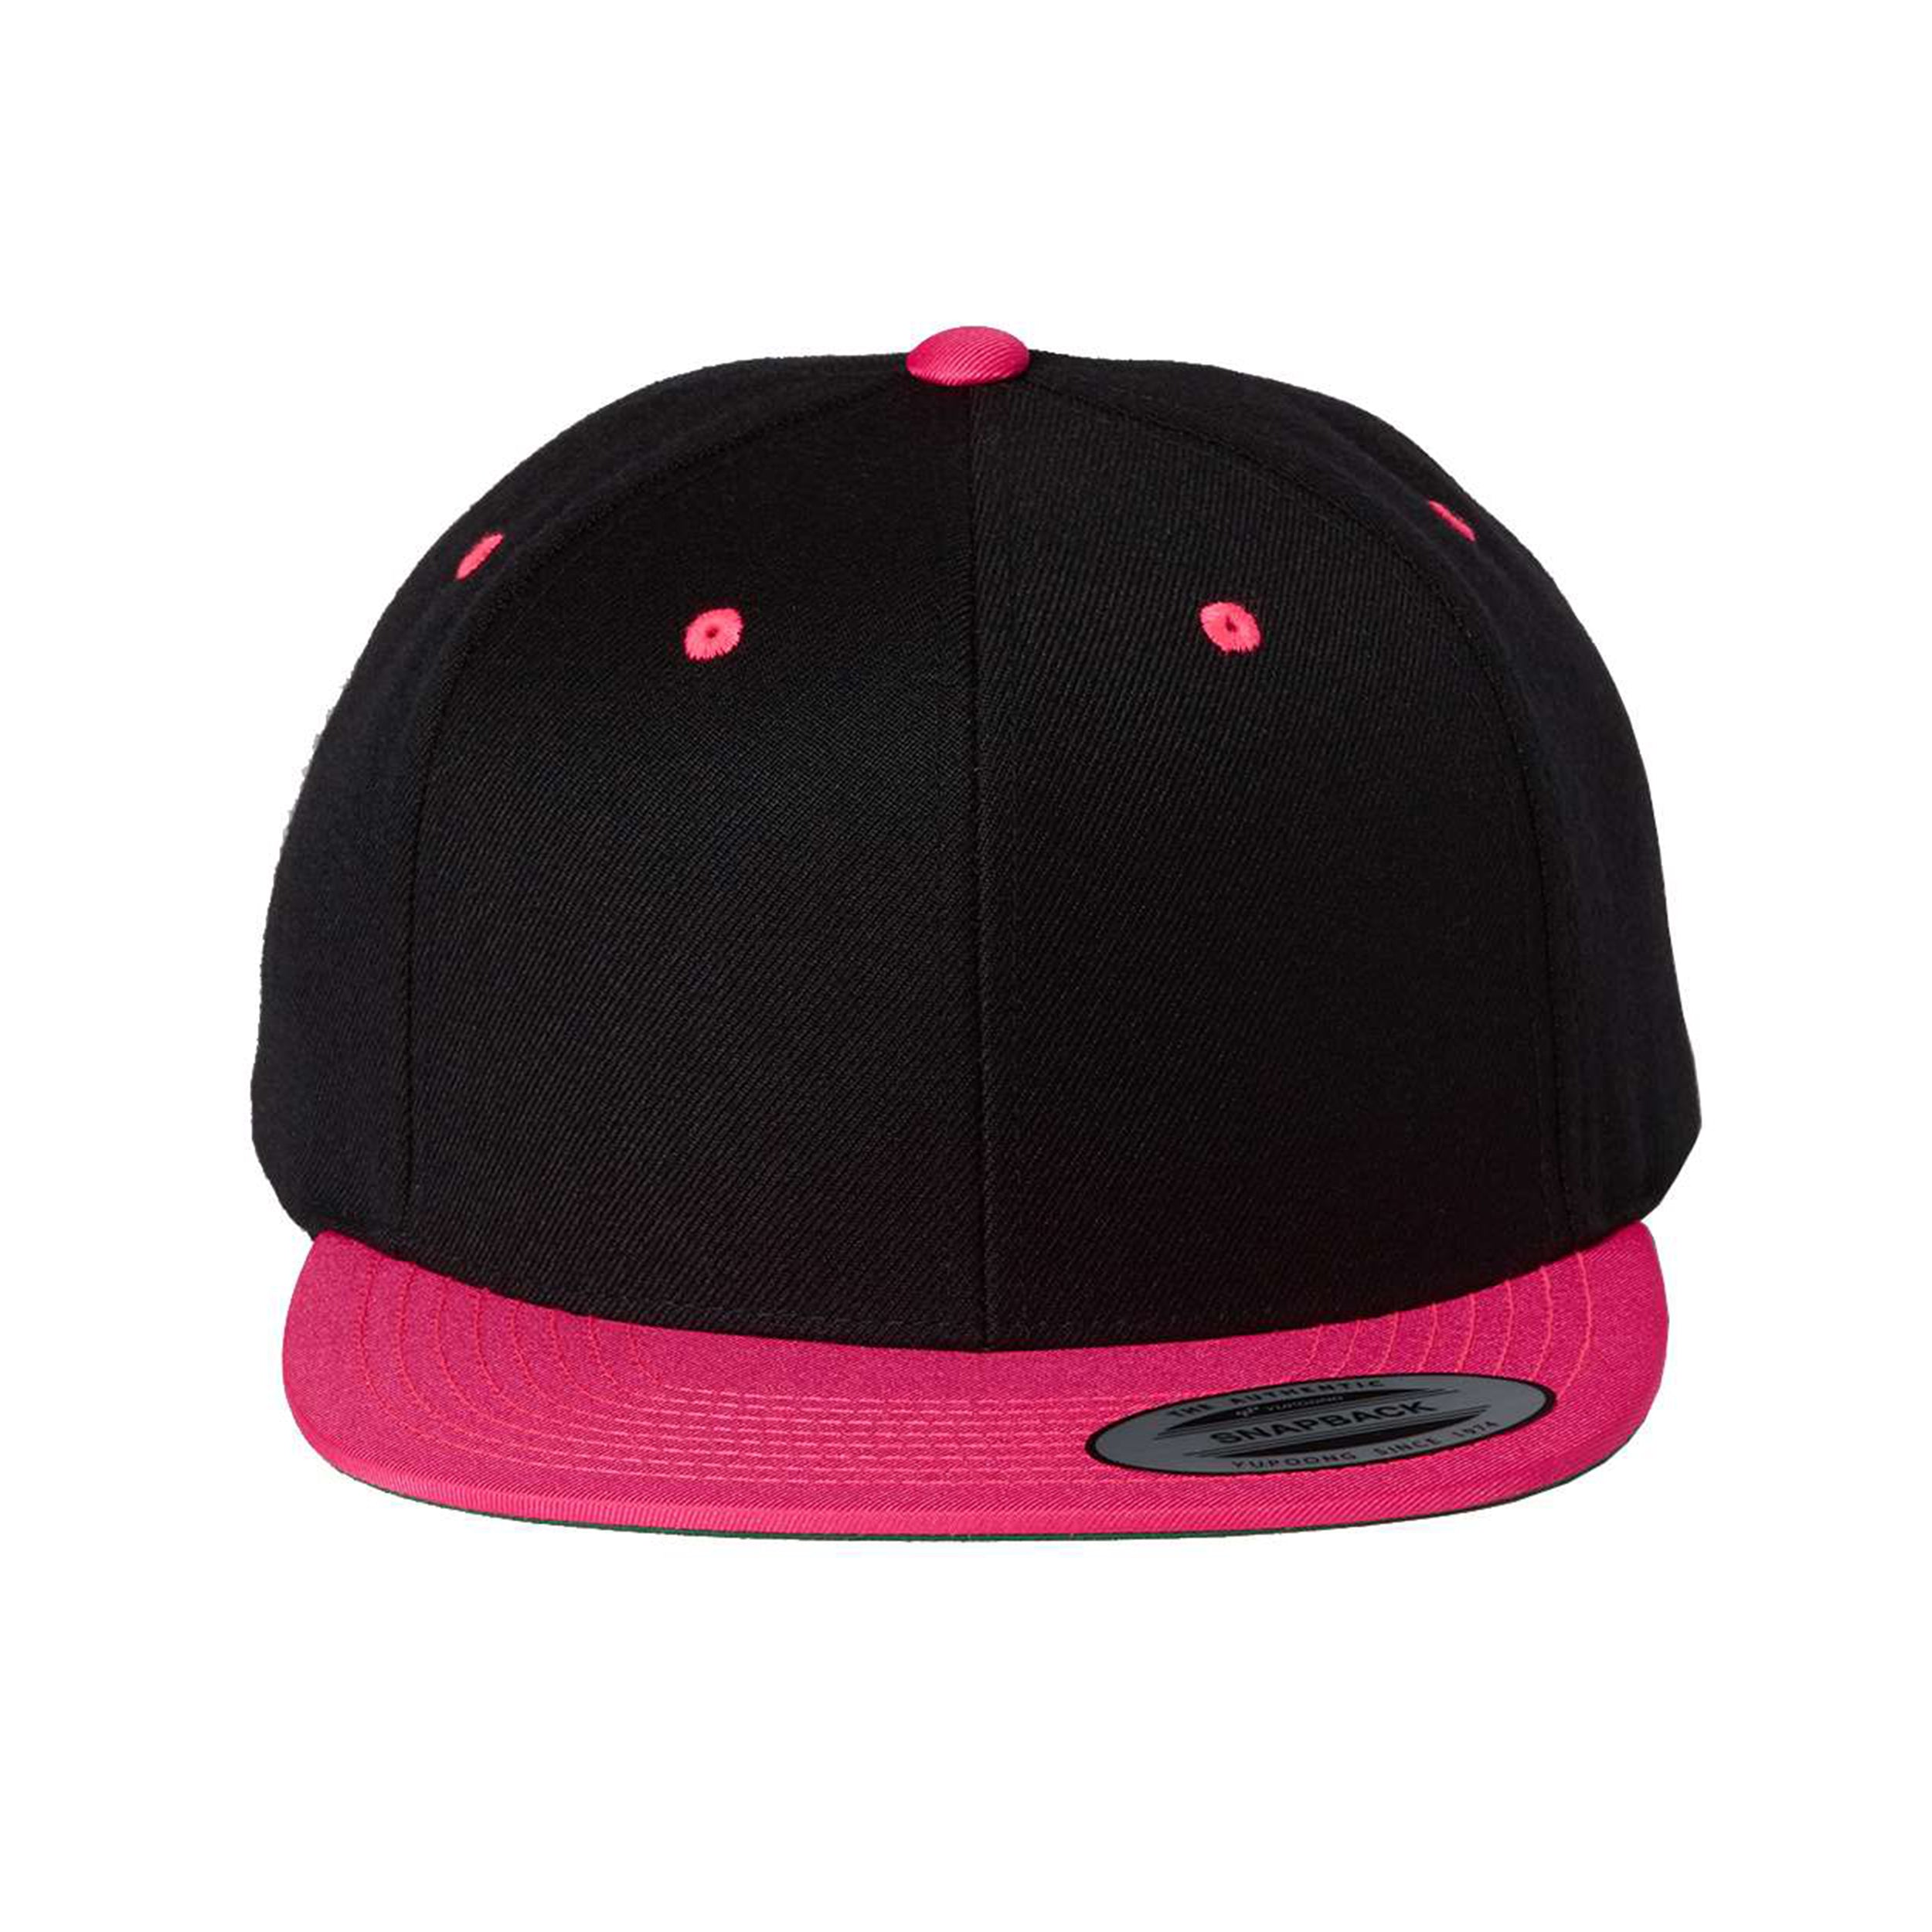 Yupoong - Adult 6-Panel Structured Flat Visor Classic Snapback, Black/ Neon Pink / Os